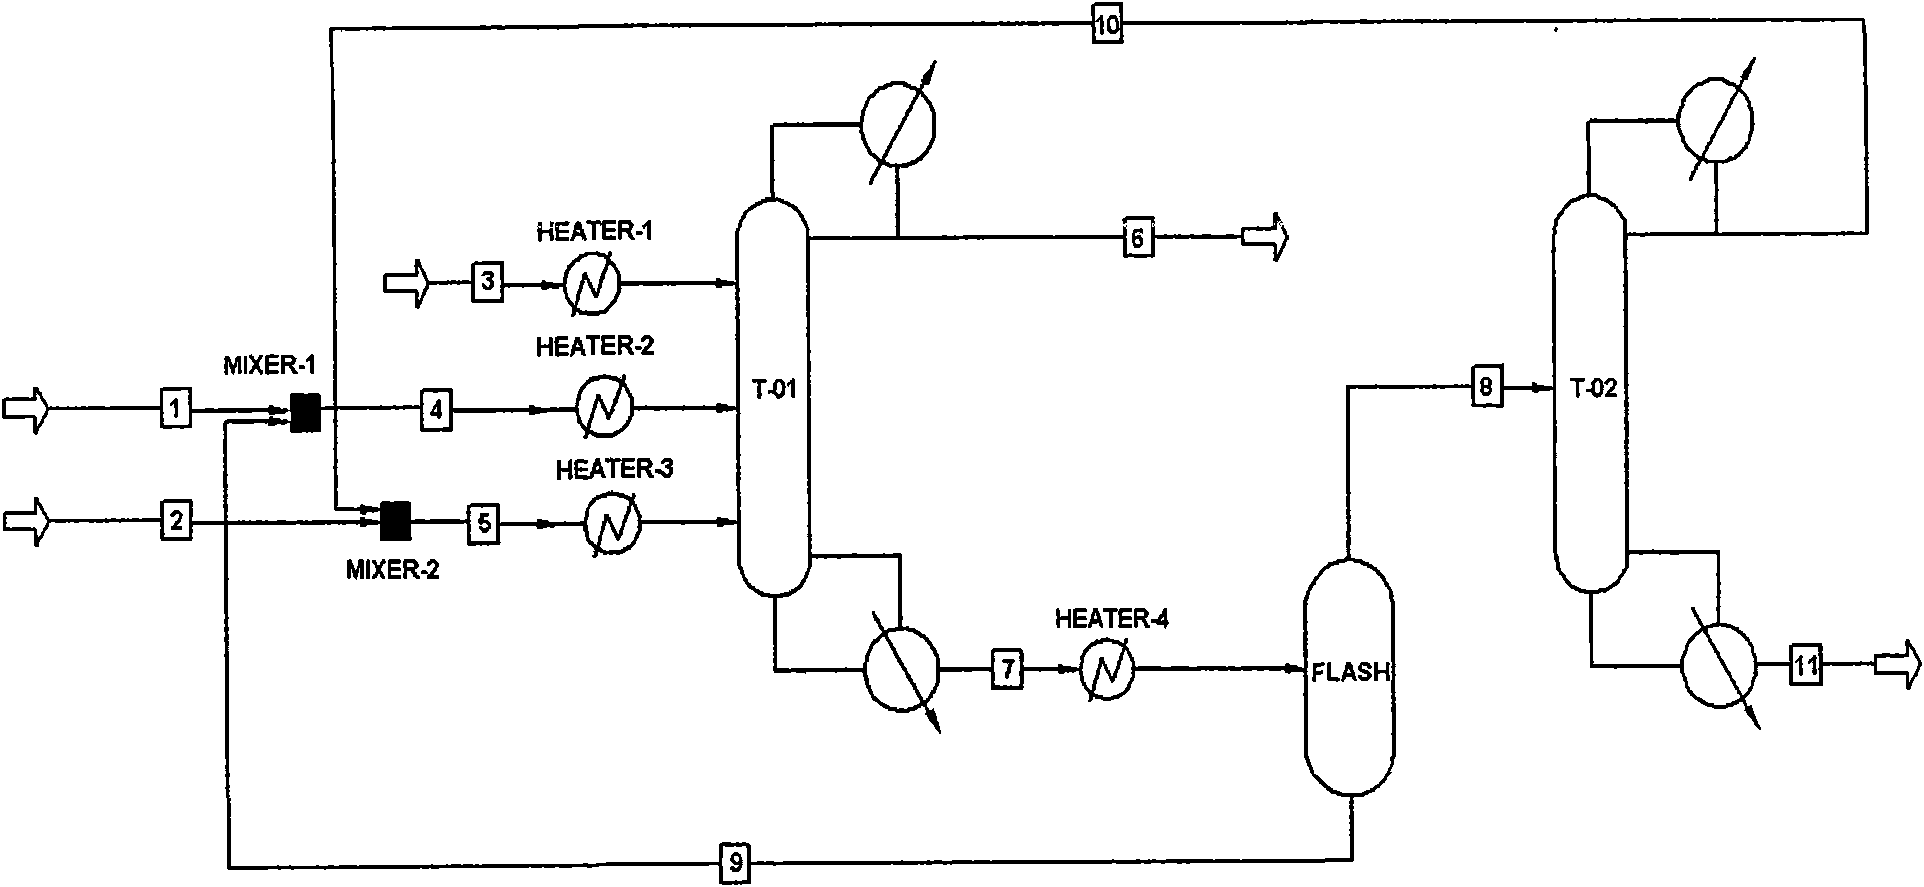 Process for continuously generating methyl acetate by reactive distillation taking ionic liquid as catalyst